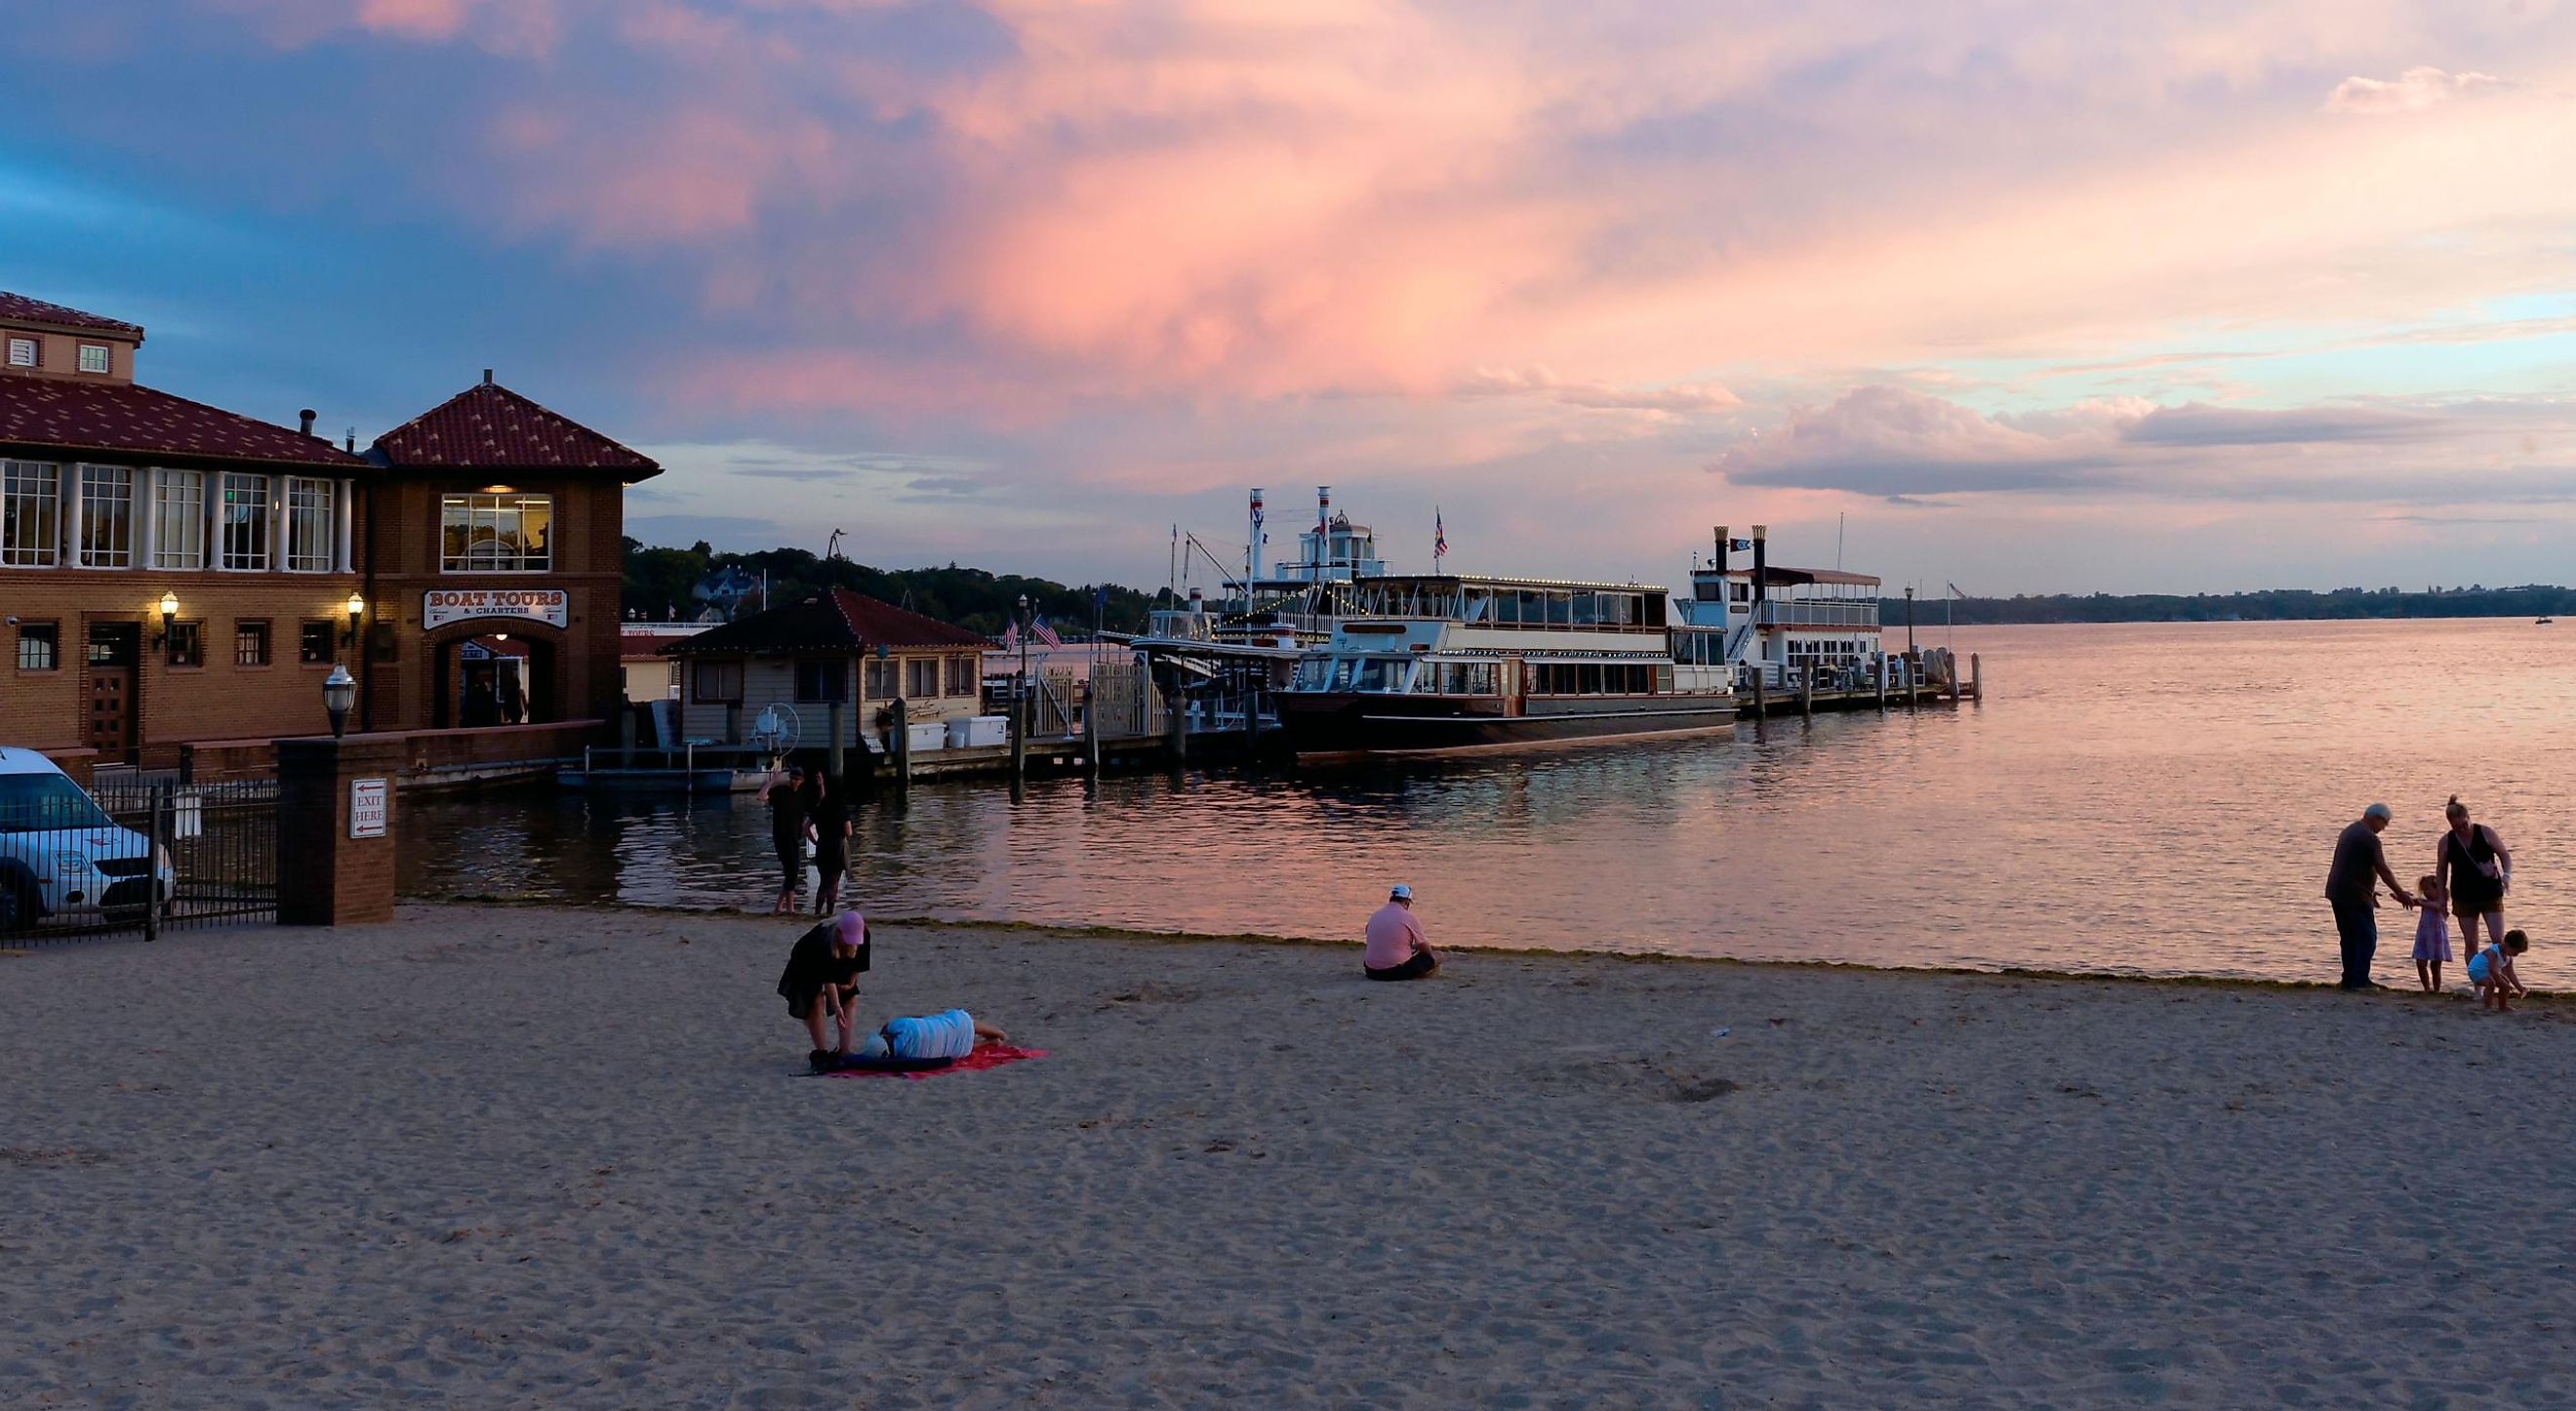 City of Lake Geneva, WISCONSINUSA-September 18, 2022: People gathering at the beach near Lake Geneva, showing the boat docks during a gorgeous pinky and cloudy sunset